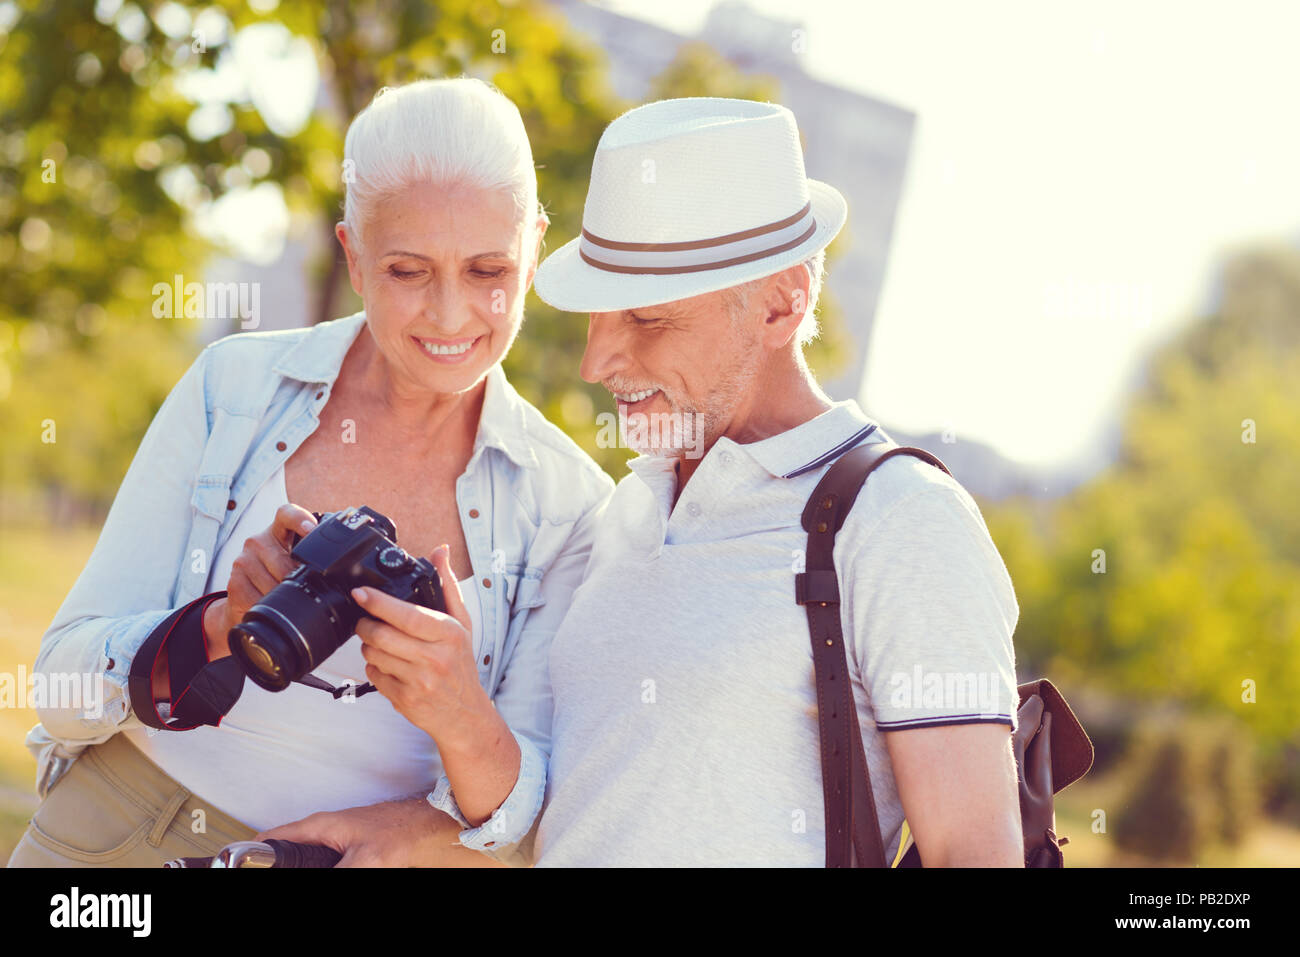 Positive minded couple looking at photo after family photoshoot Stock Photo